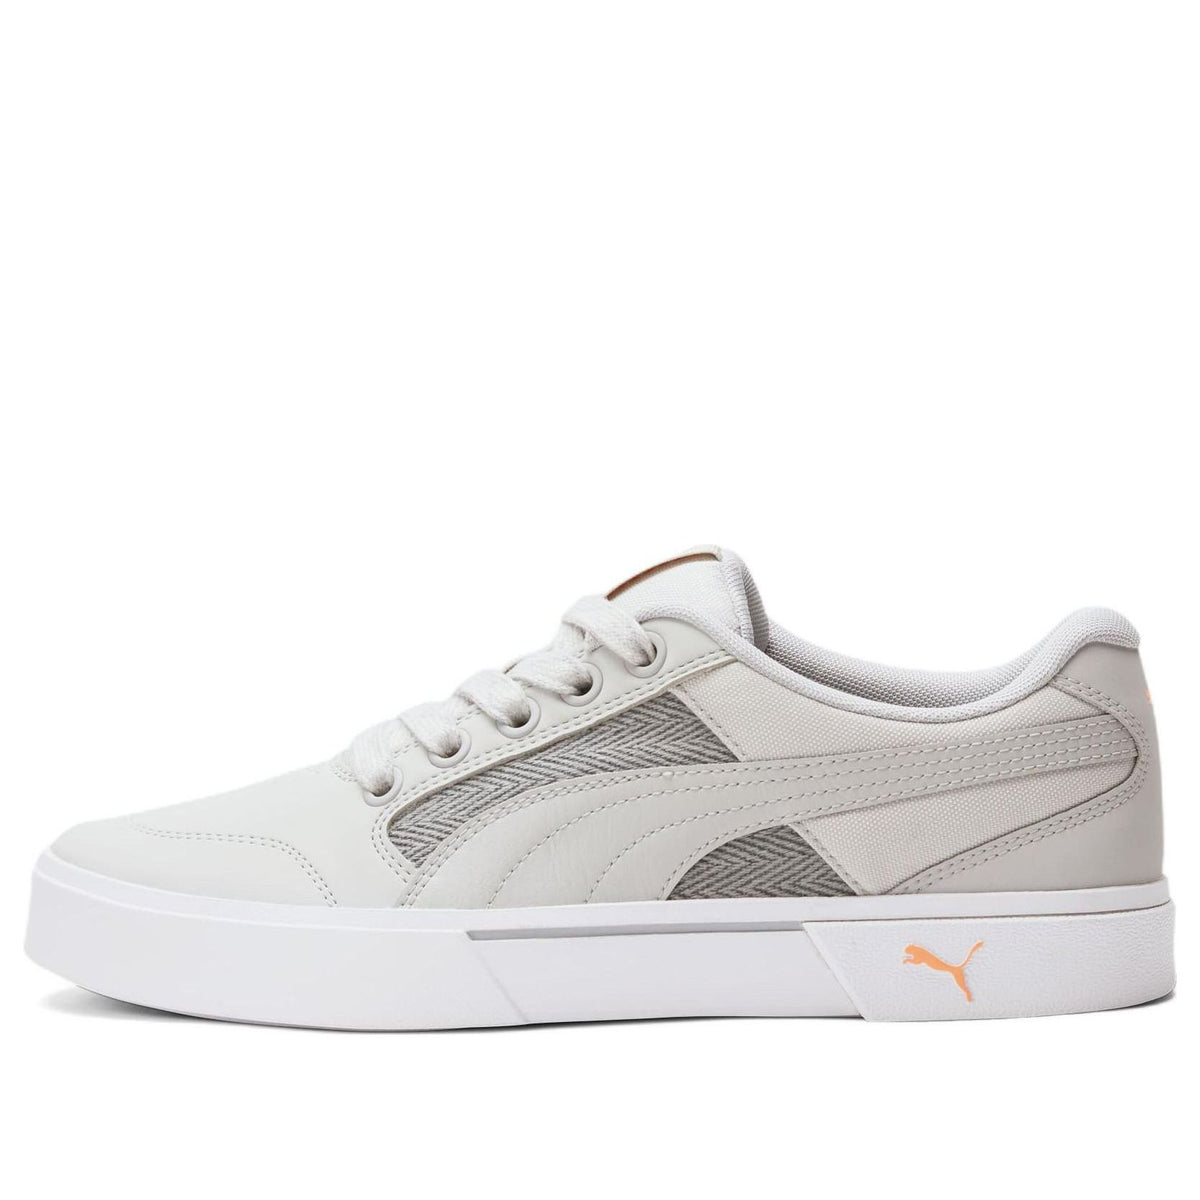 PUMA C-Rey Atypical Casual Skateboarding Shoes Unisex Gray 385581 